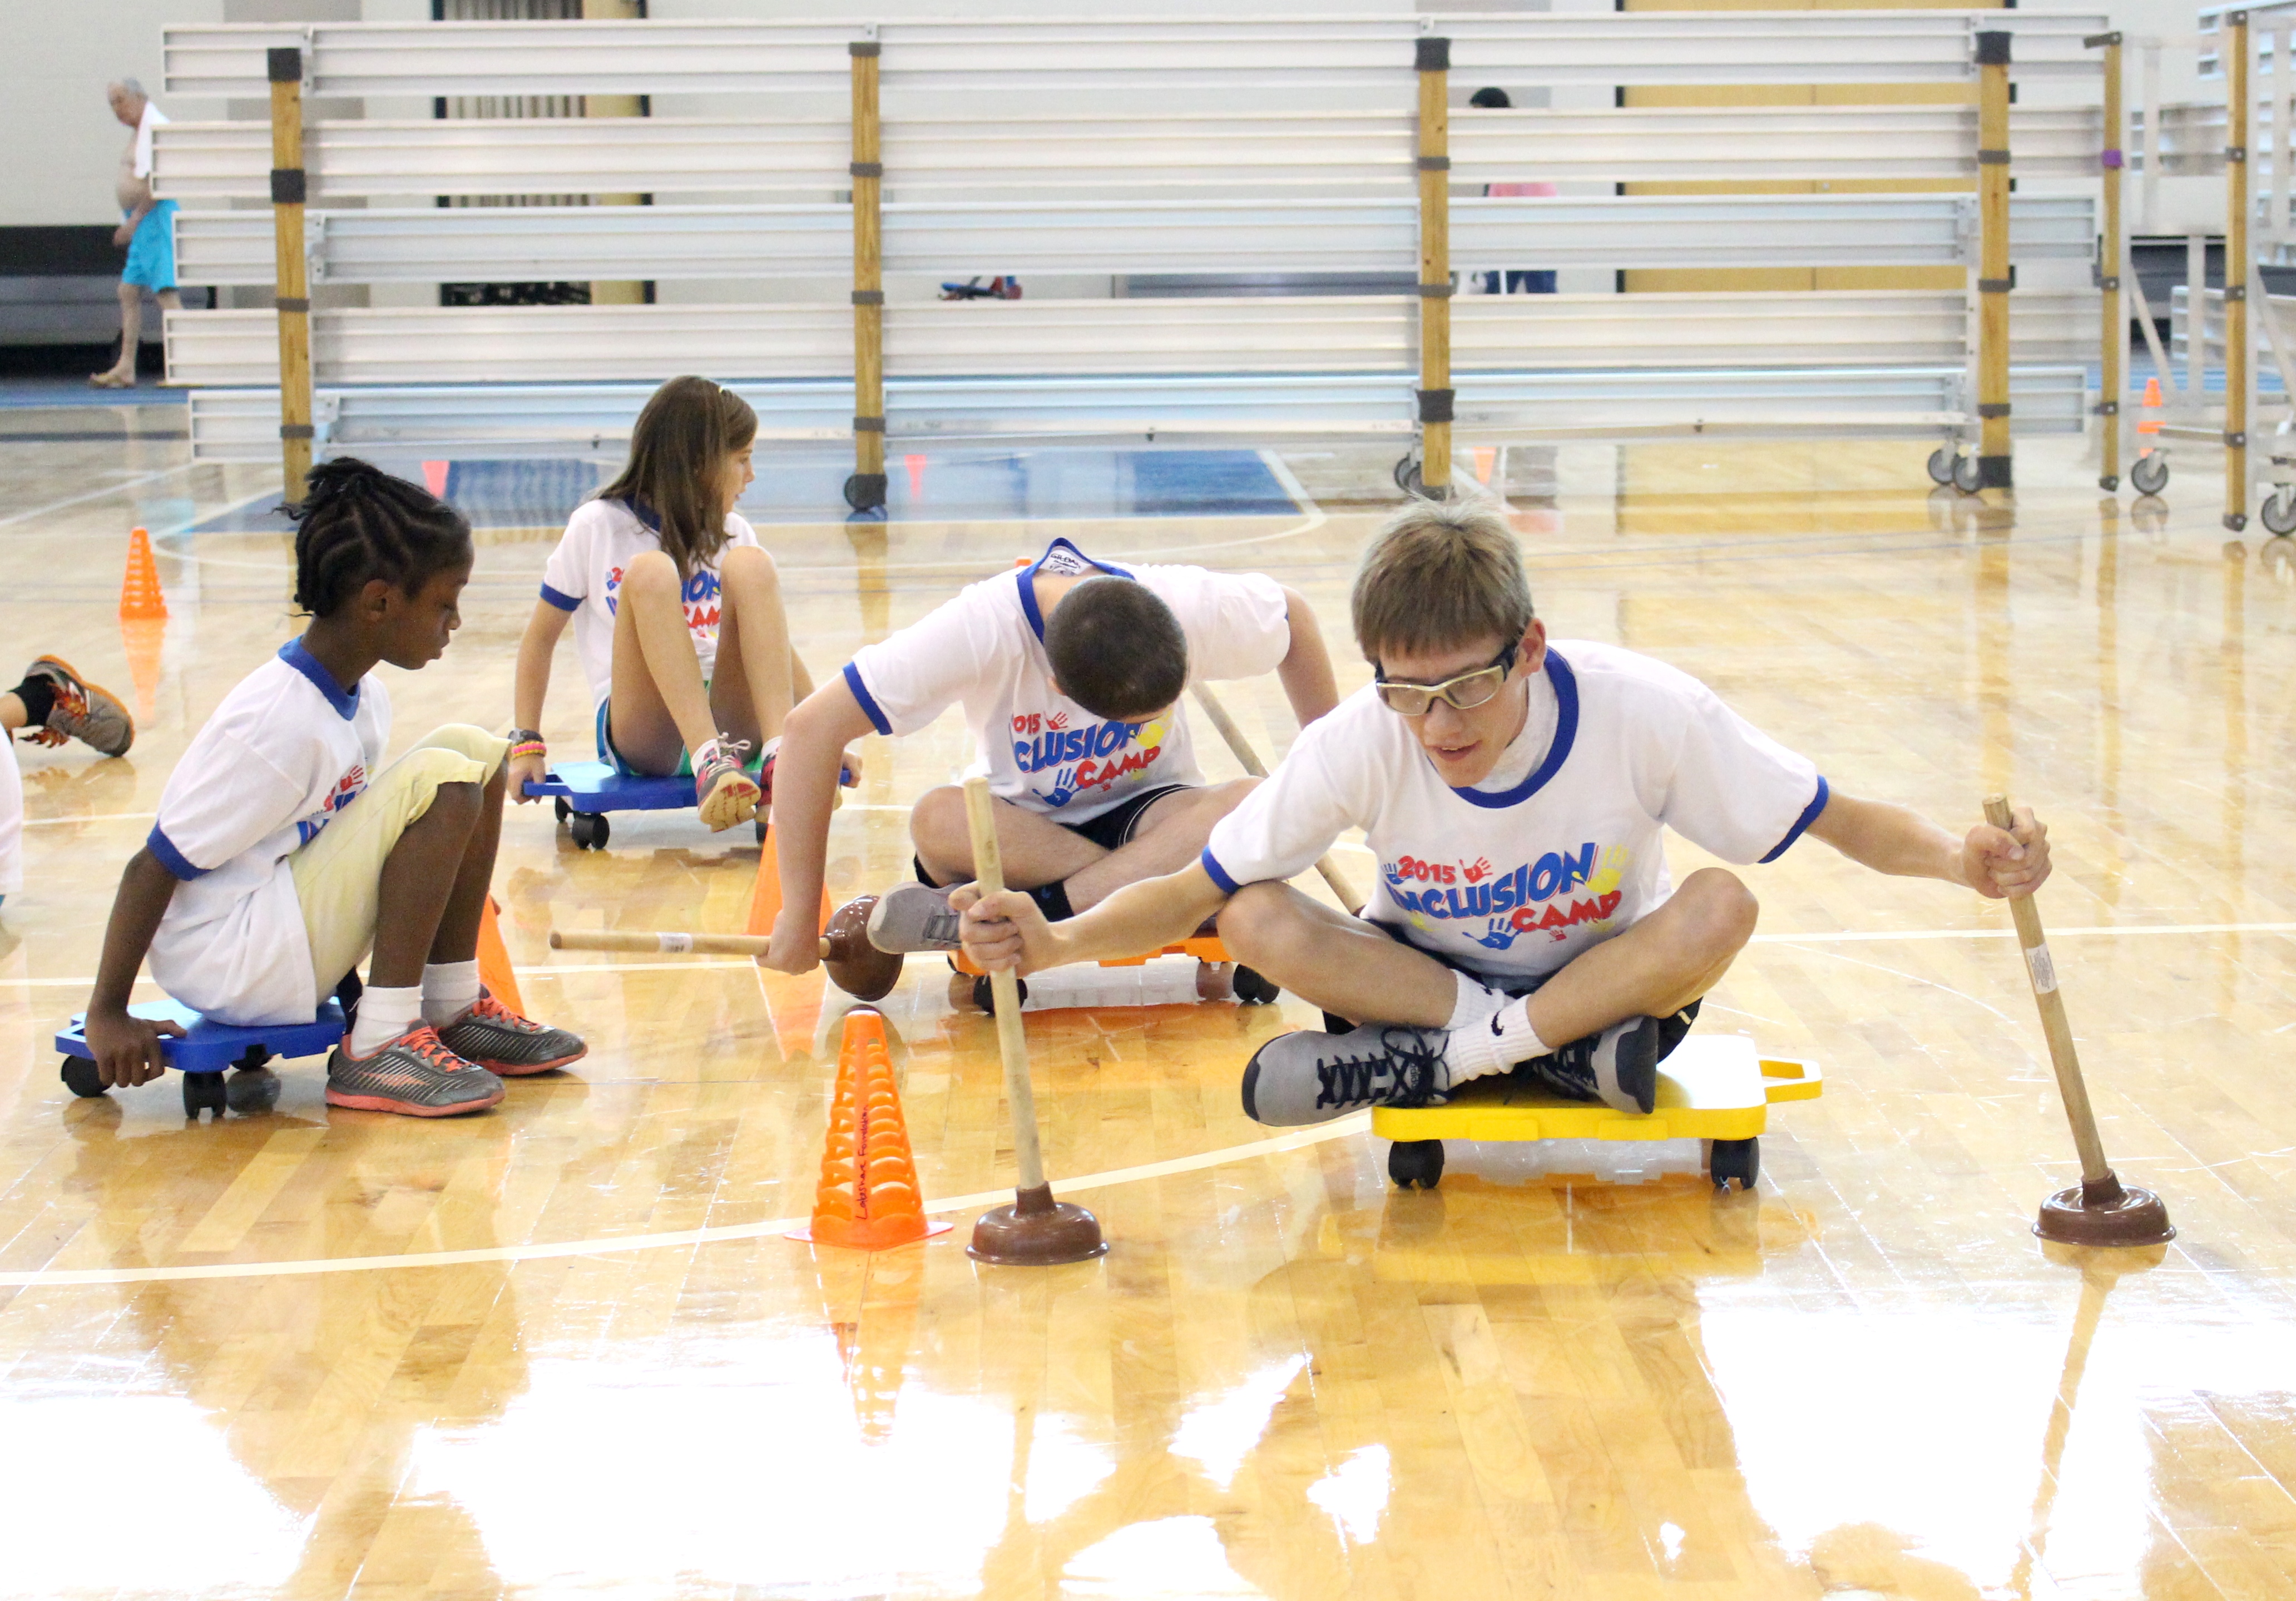 physical education activities for blind students